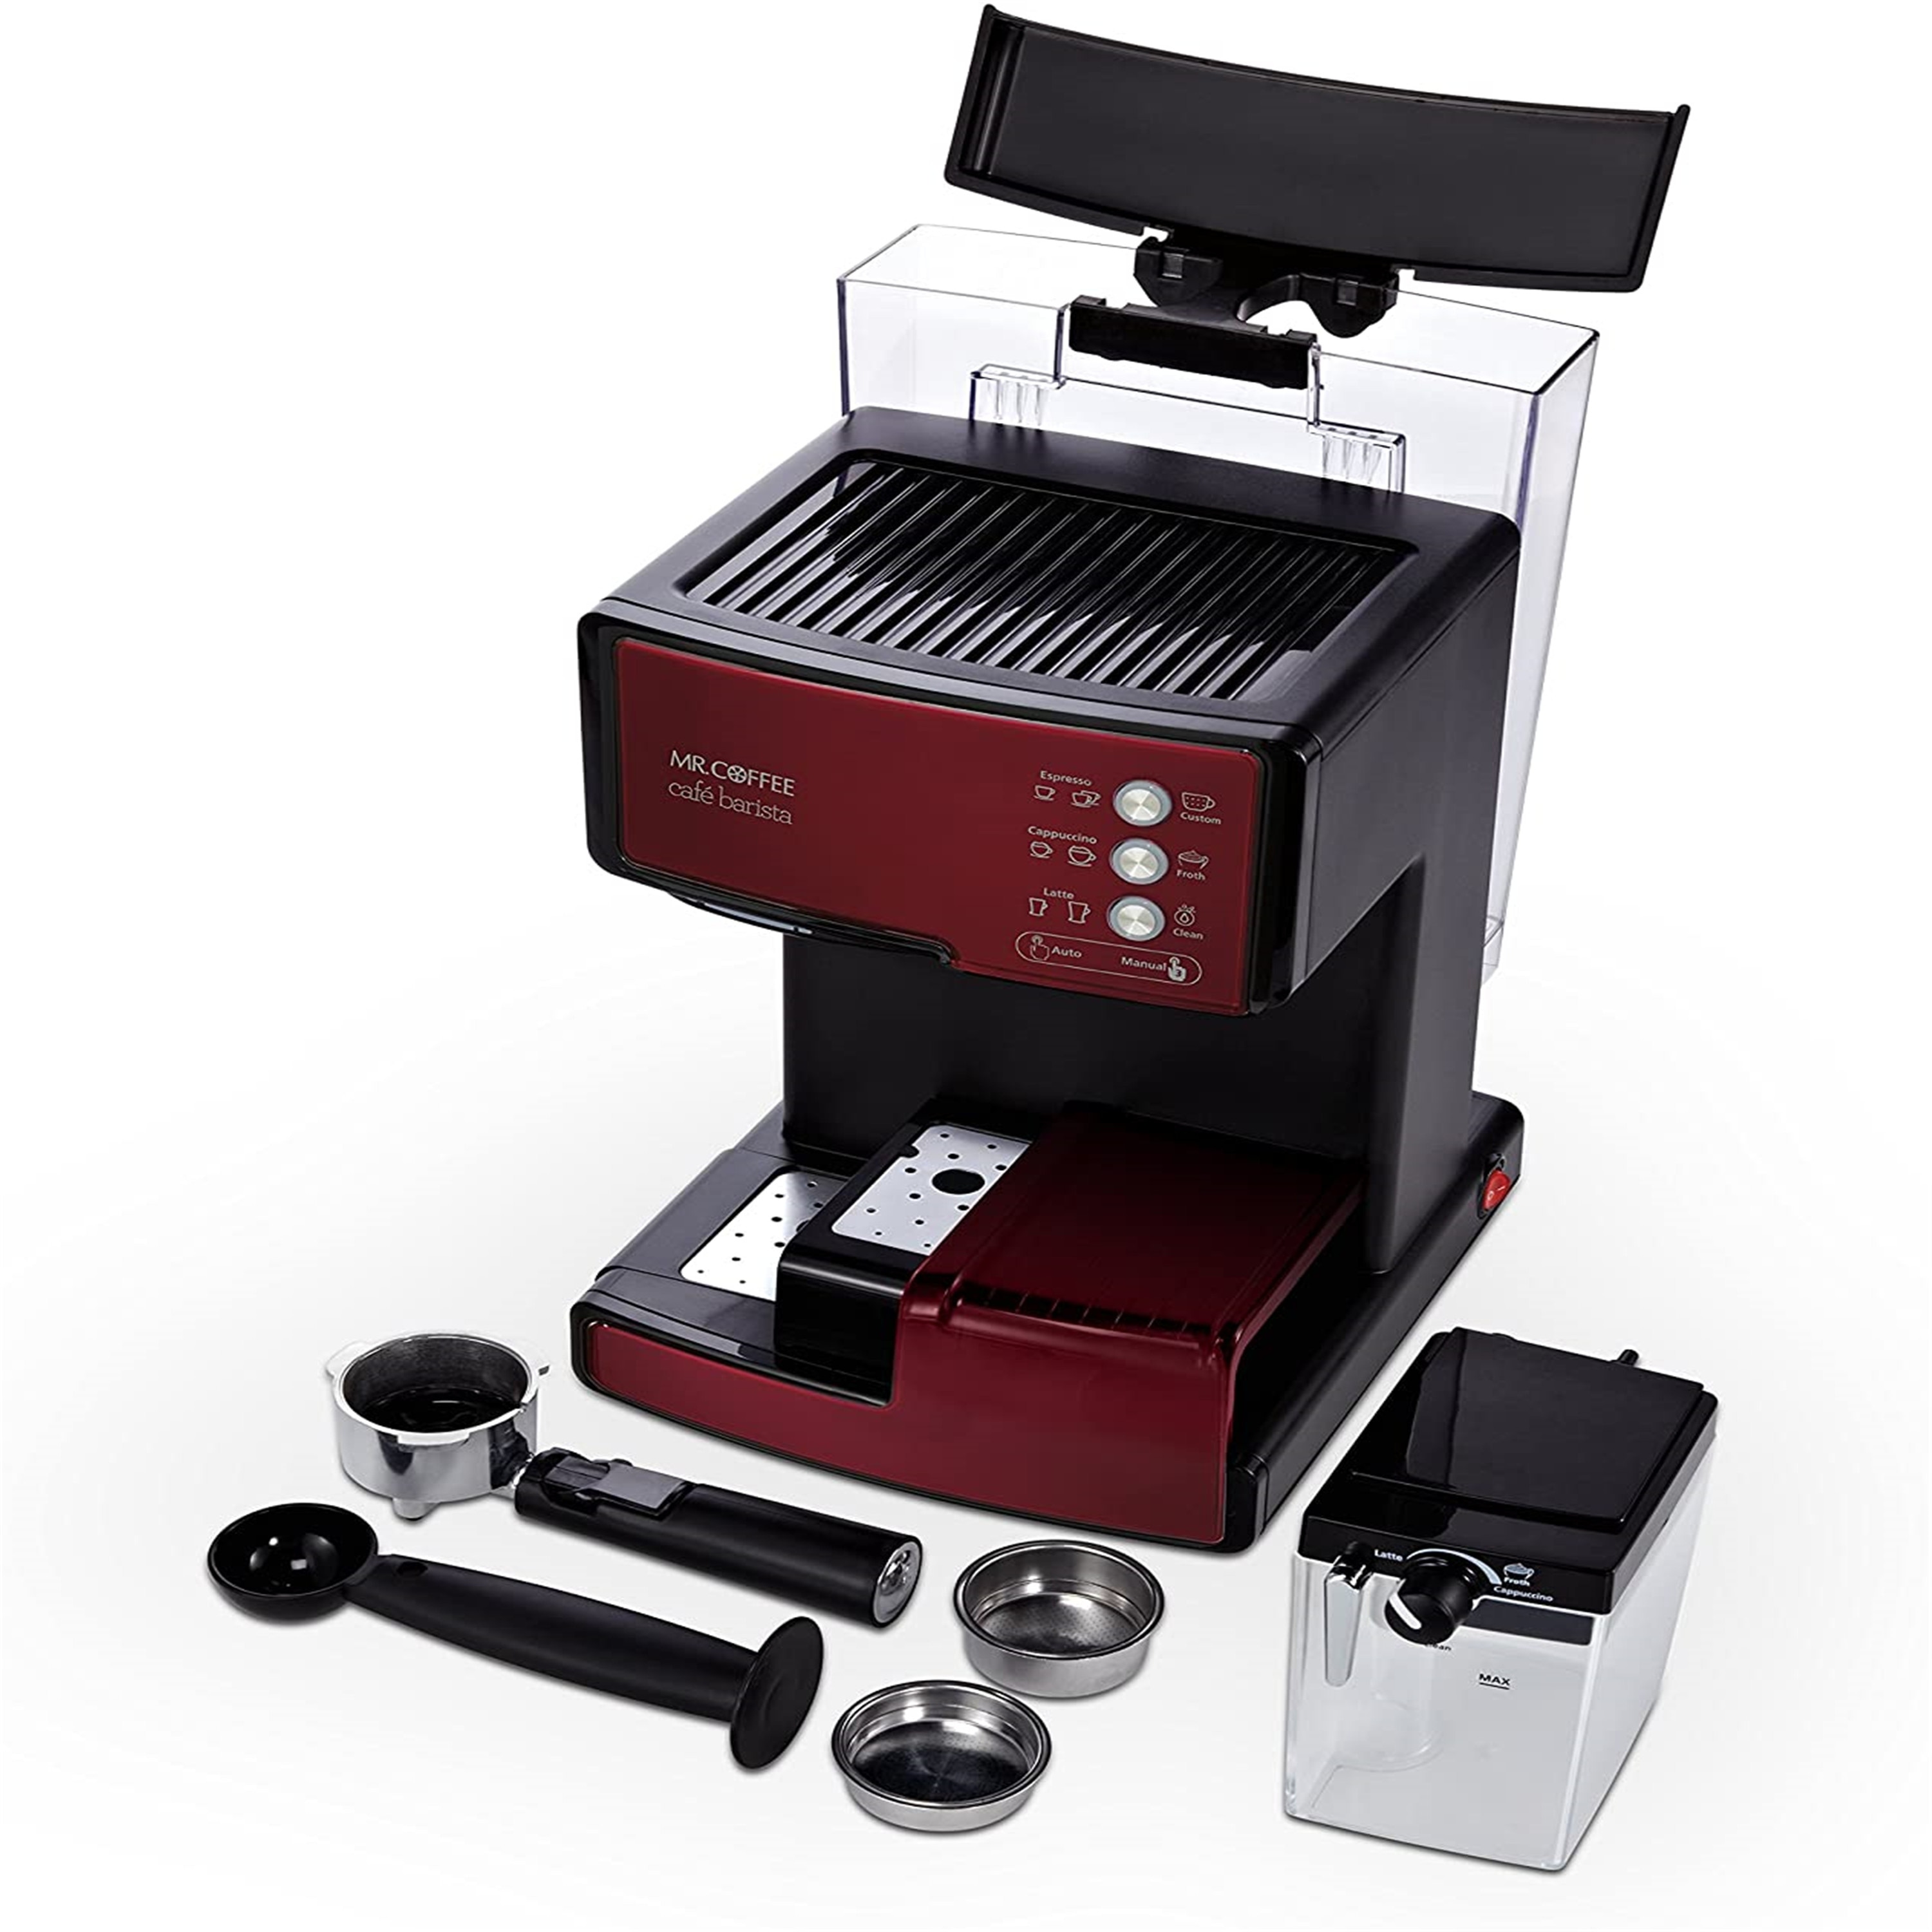 https://ak1.ostkcdn.com/images/products/is/images/direct/8bbfc346870f783210d43704105c13b81c2025fc/Cafe-Barista-Espresso-and-Cappuccino-Maker%2C-Red---BVMC-ECMP1106.jpg